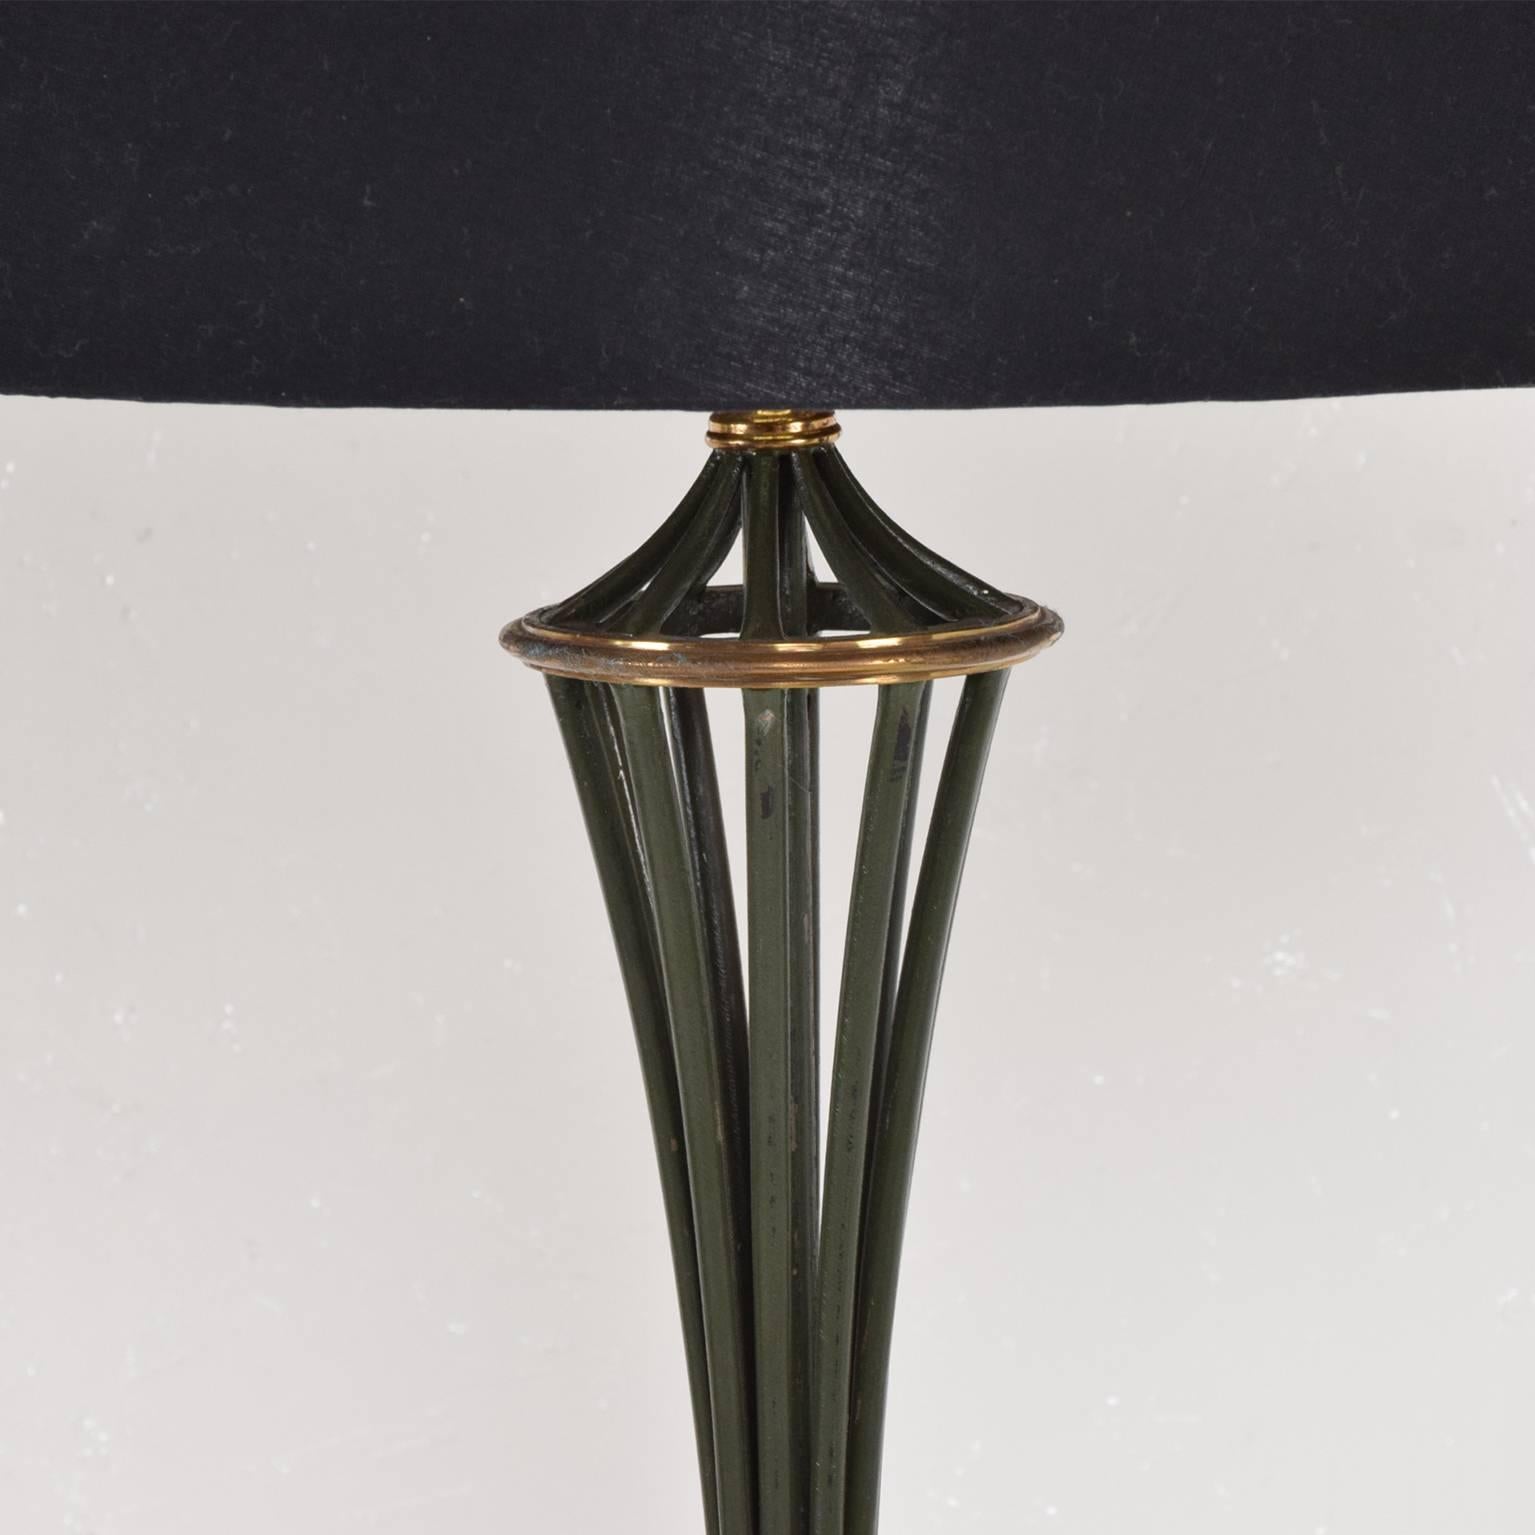 Neoclassical Arturo Pani Refined Elegance Floor Lamp with Scalloped Table Mexico City 1940s